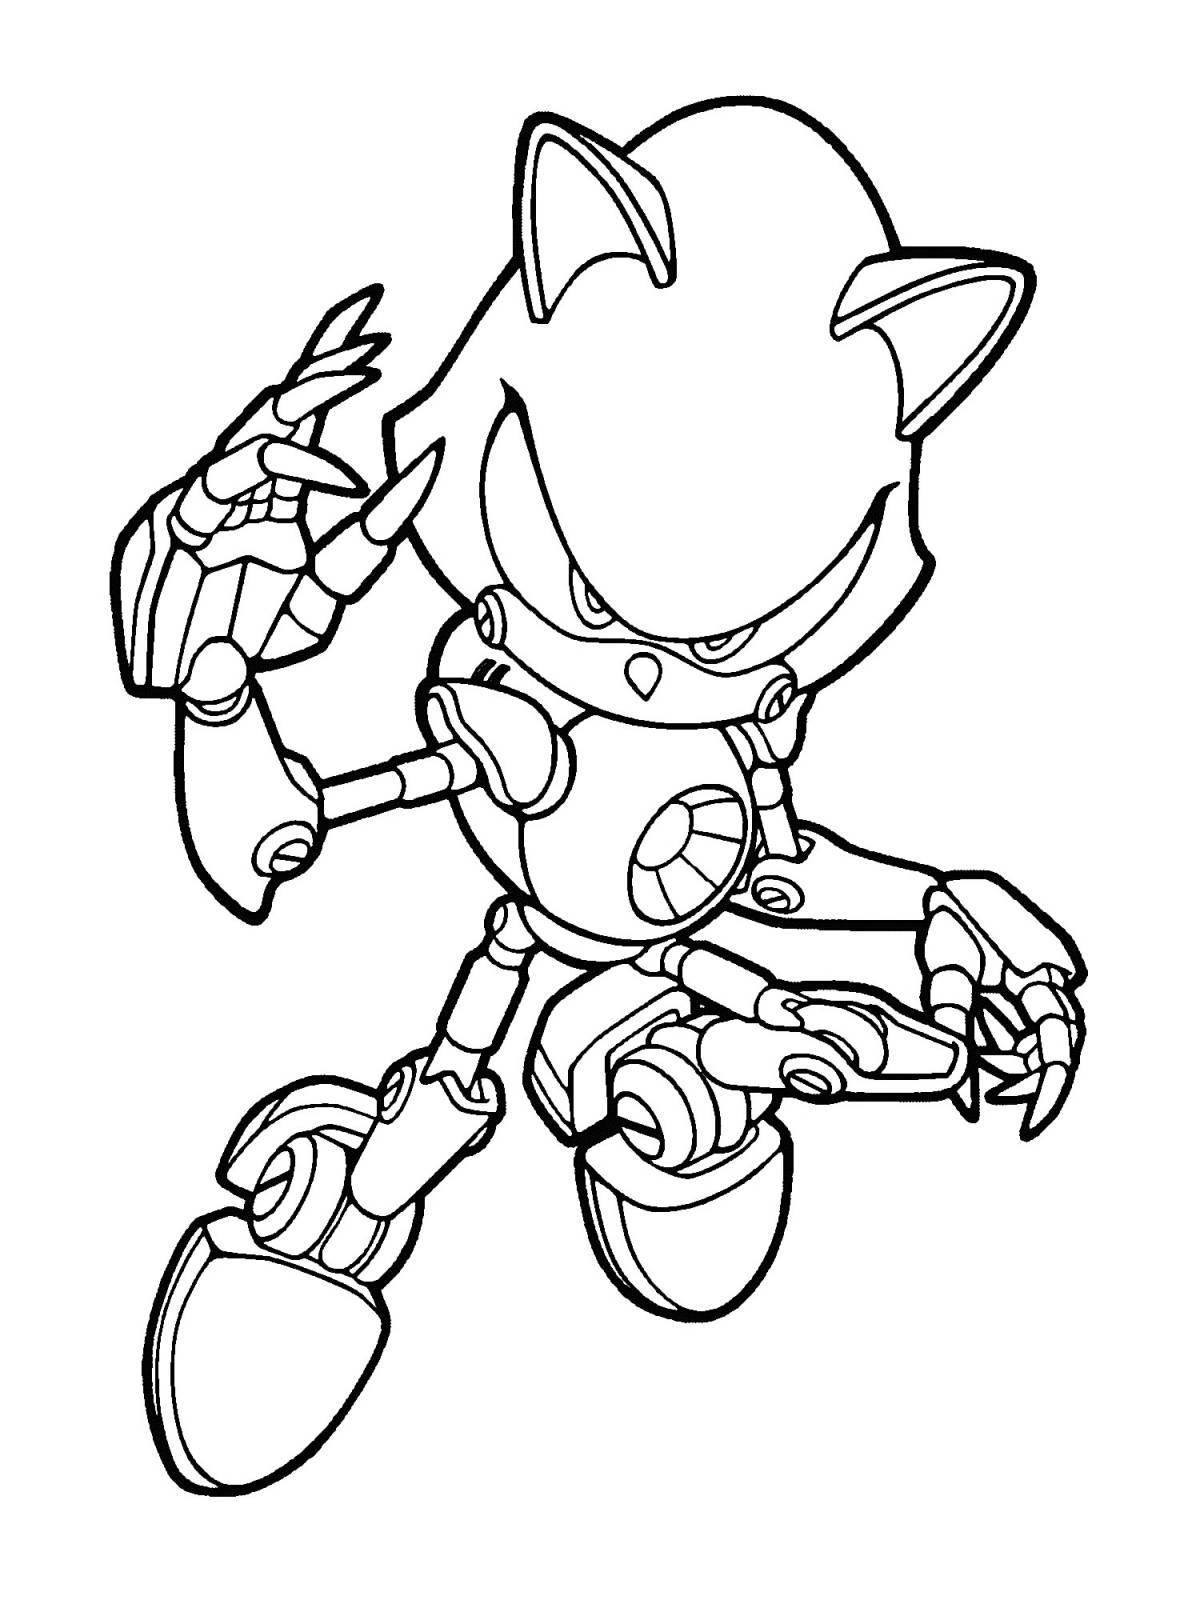 Violent coloring sonic for boys